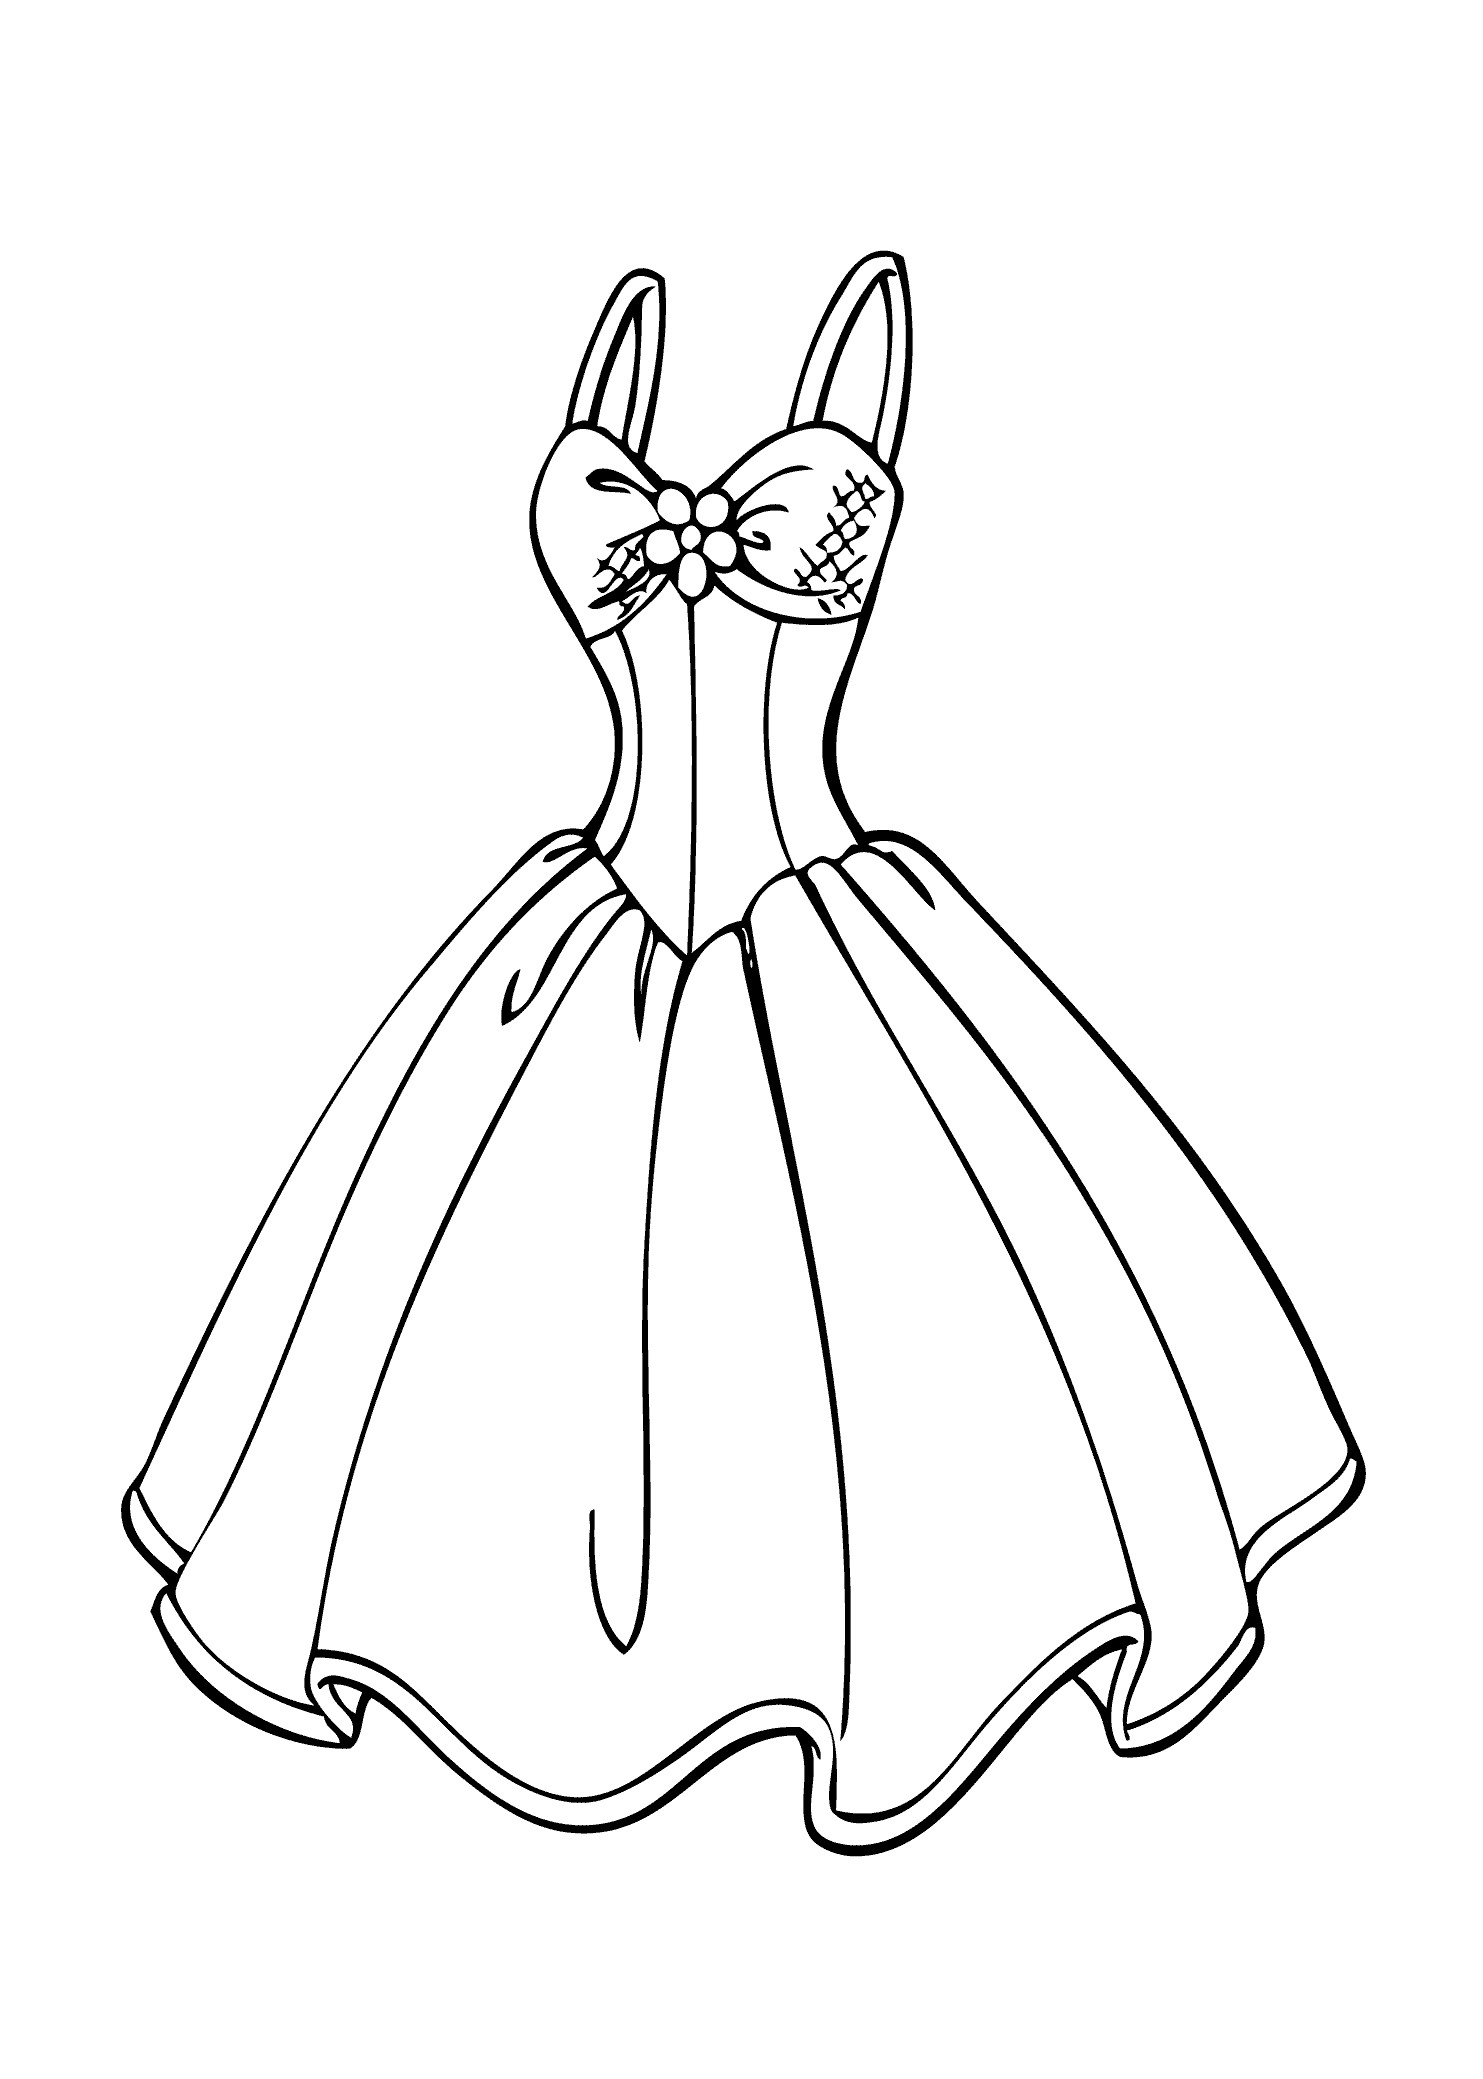 Wedding Dress Coloring Pages
 Wedding dress coloring page for girls printable free